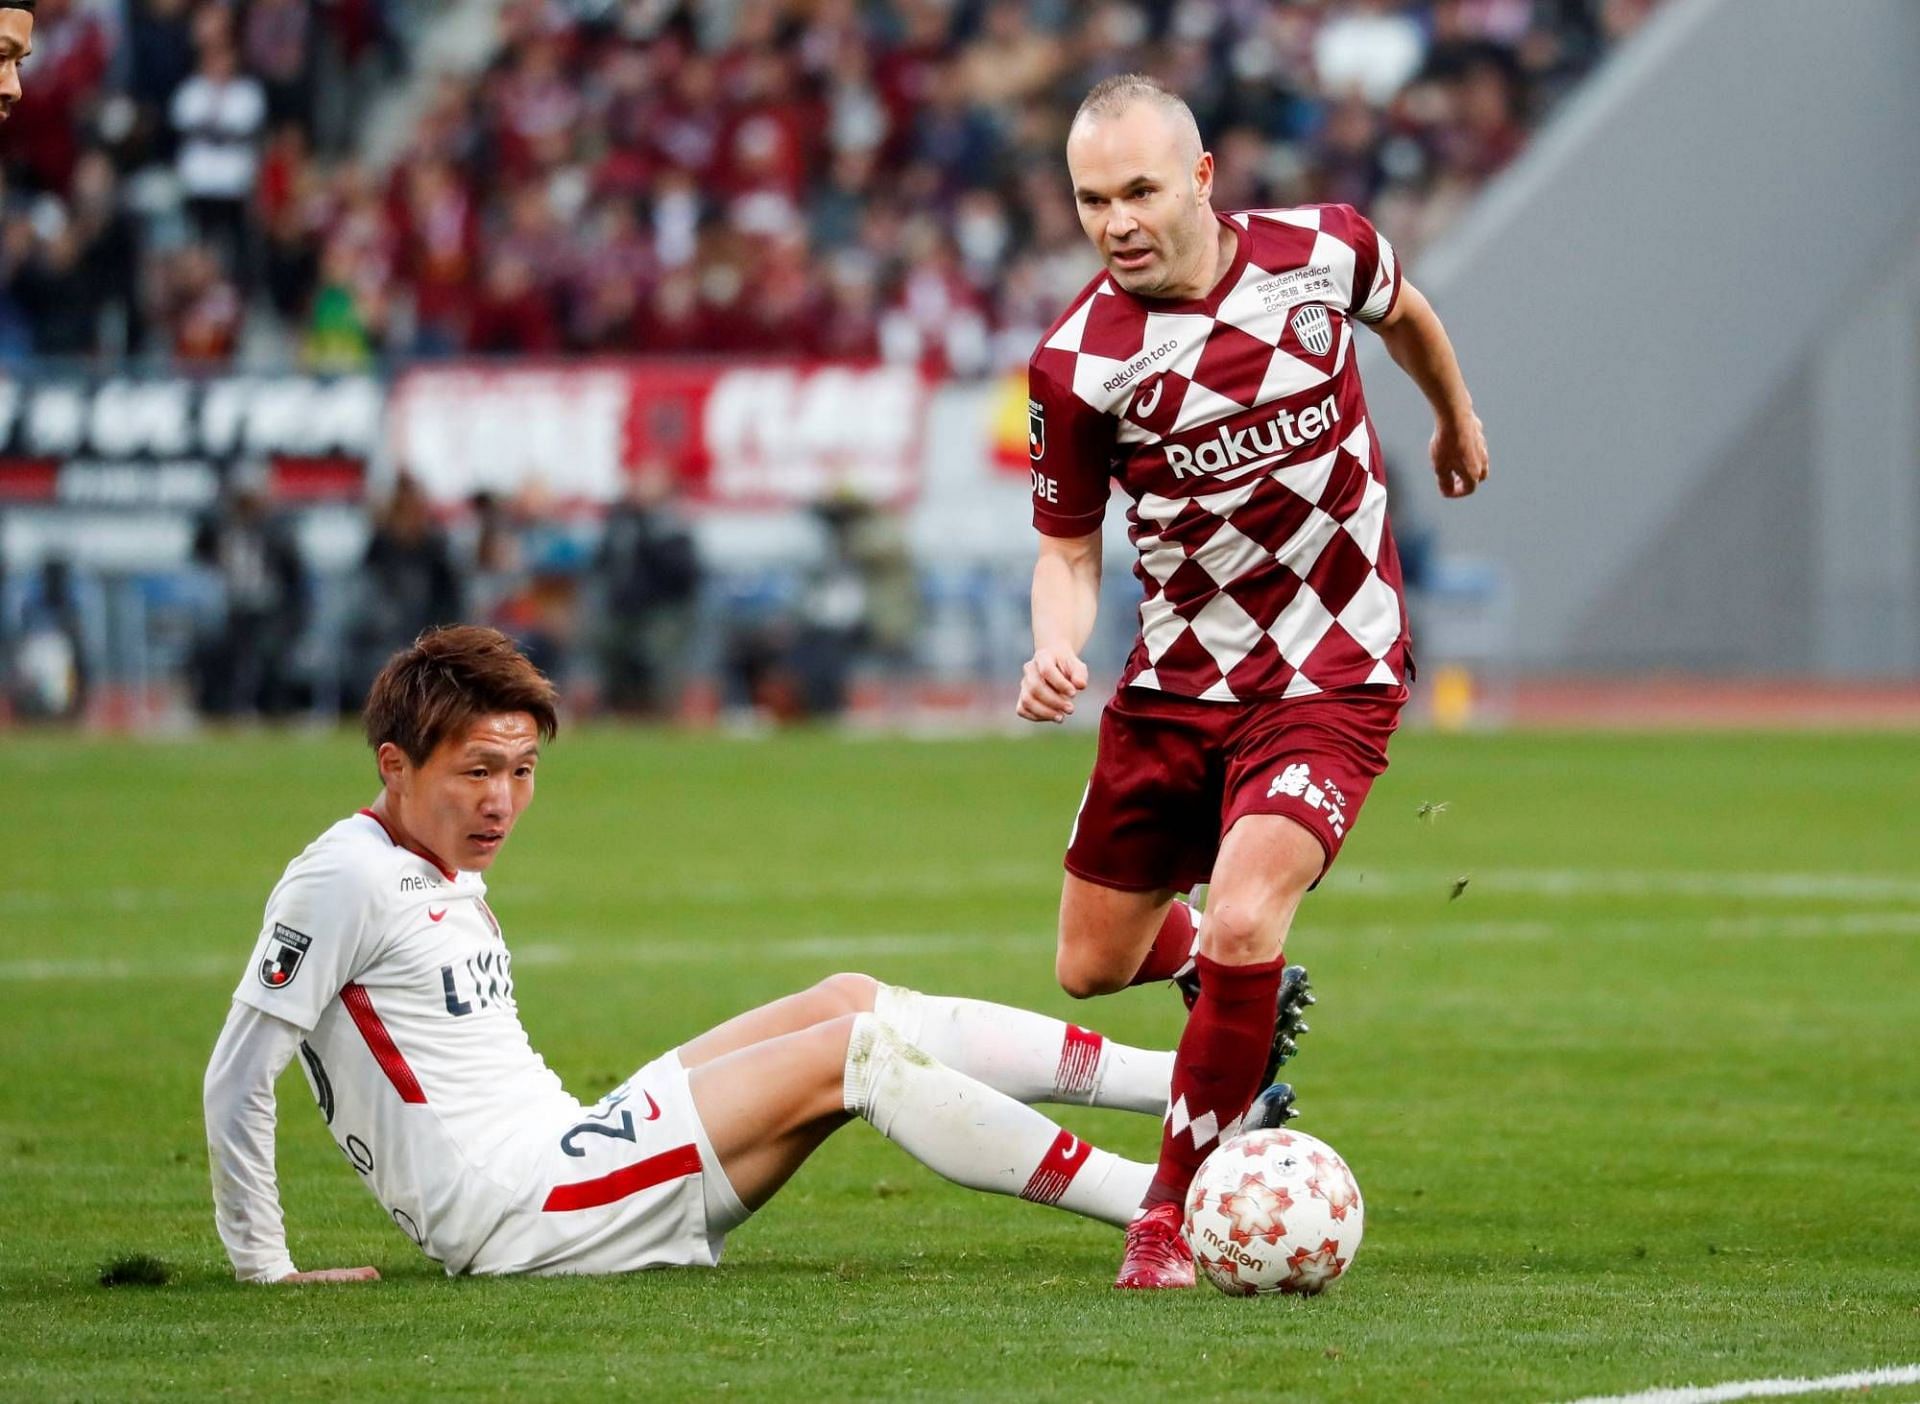 Vissel Kobe host Kashima Antlers in their upcoming J League fixture on Friday